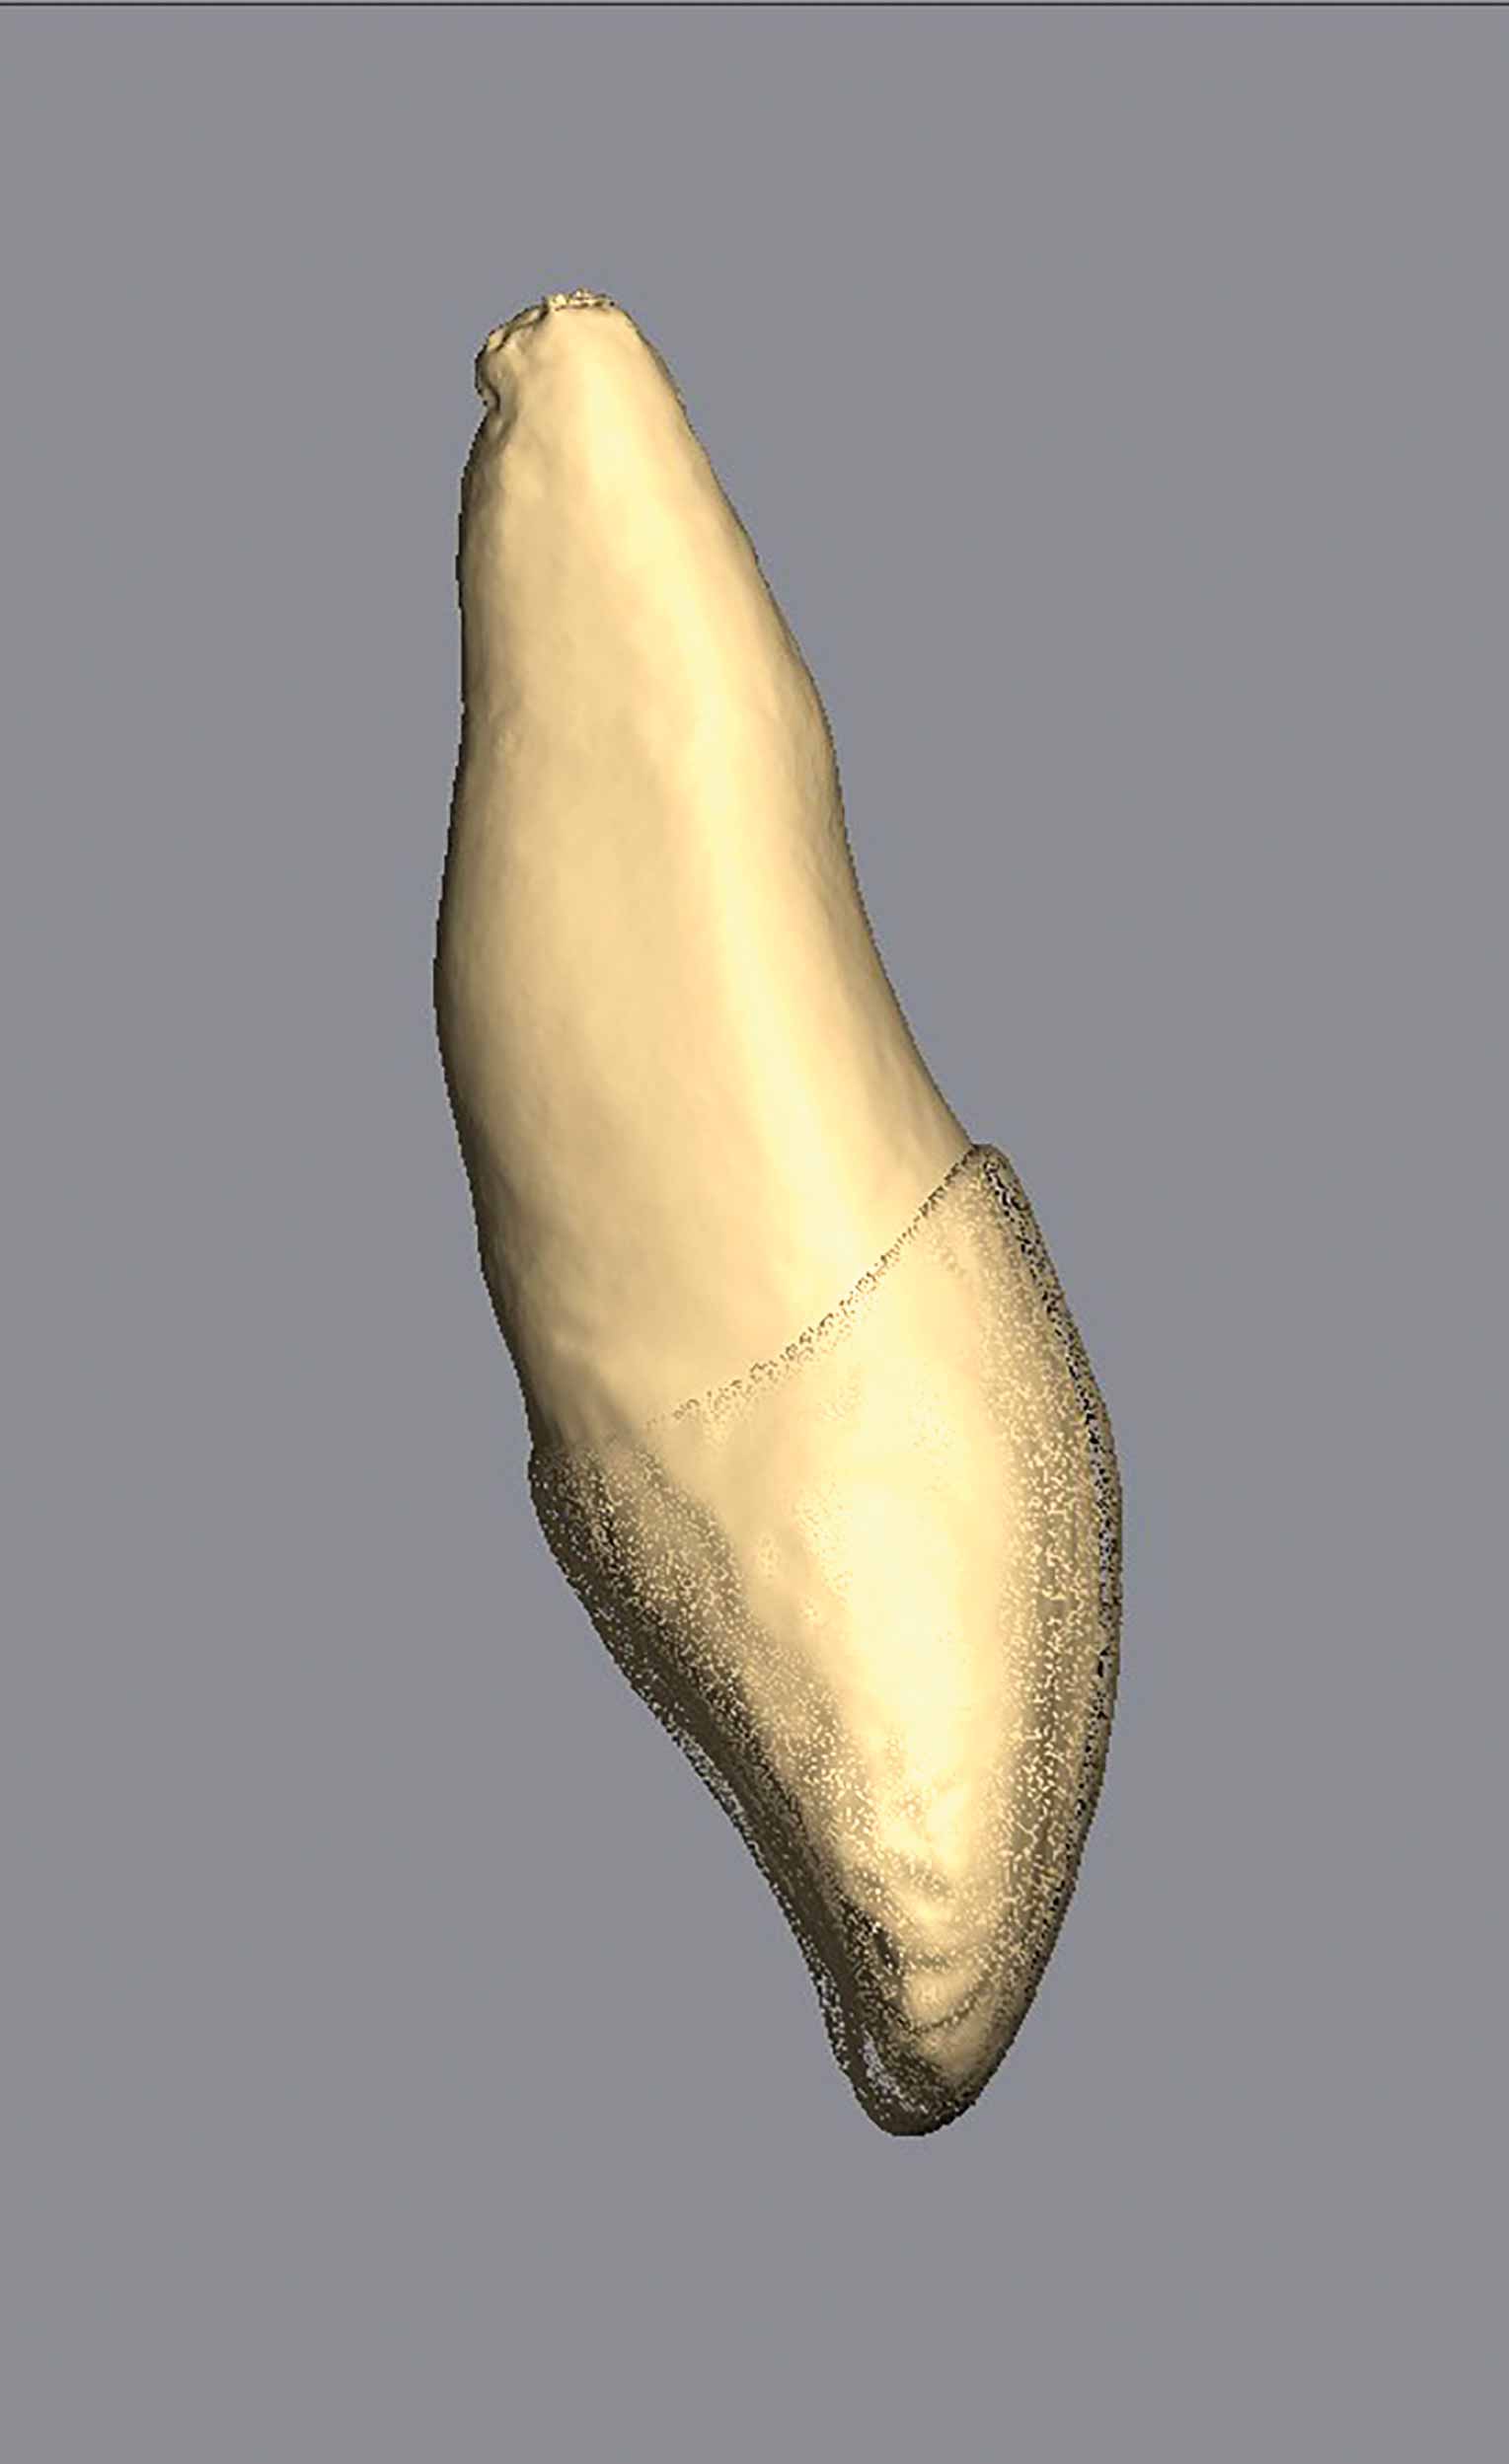 Another real extracted tooth modelled for Vitapan